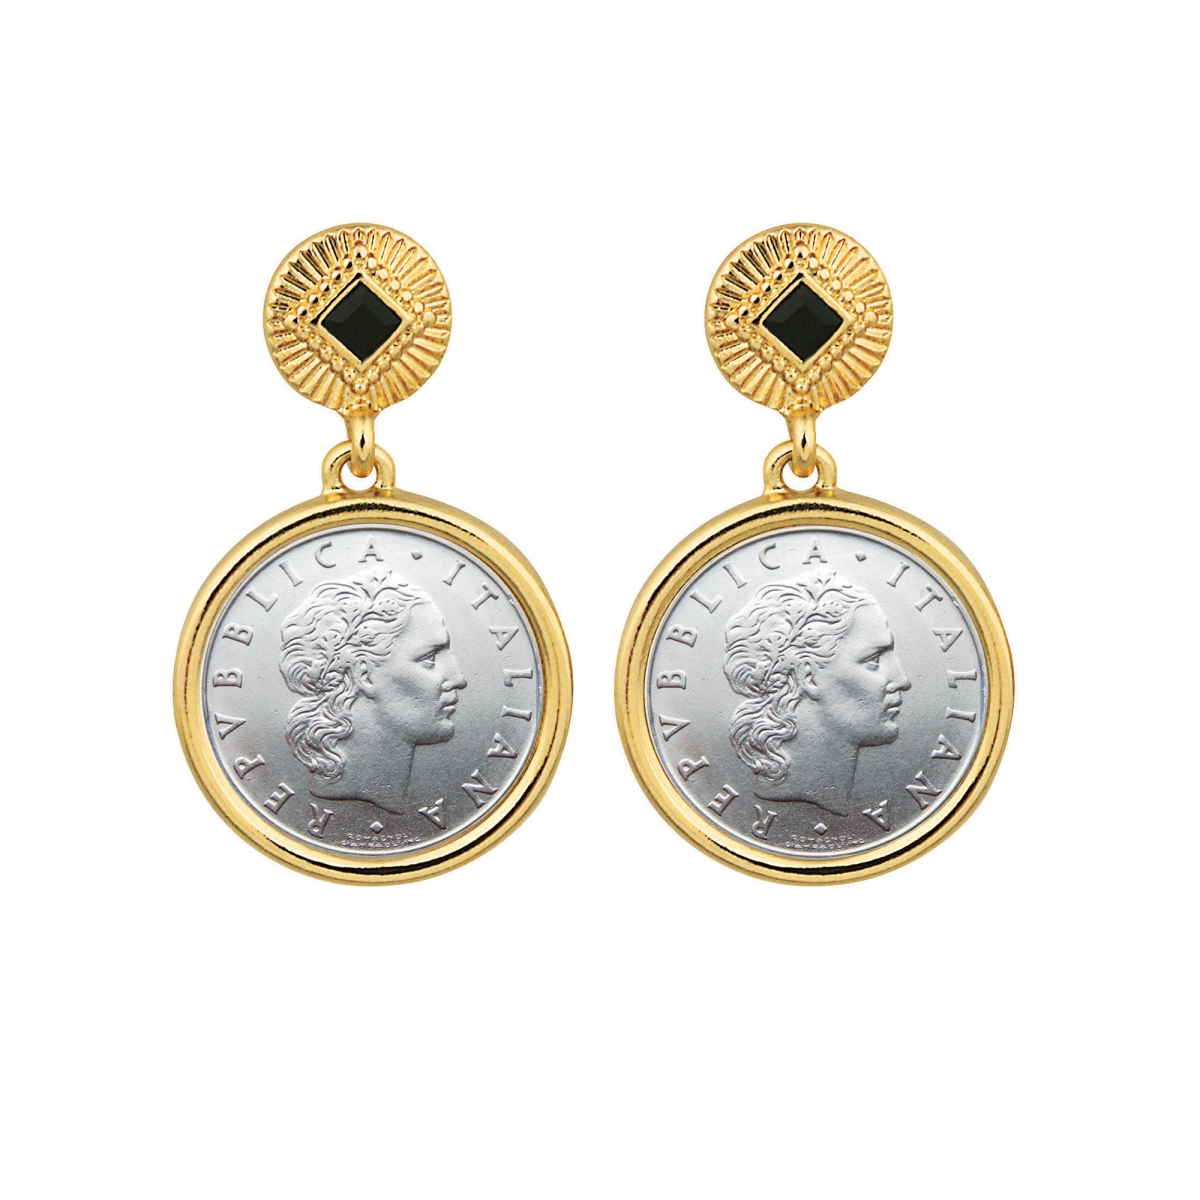 Picture of American Coin Treasures 17097 Italian 50 Lire Coin Goldtone Art Decor Earrings with Black Stone, Gold